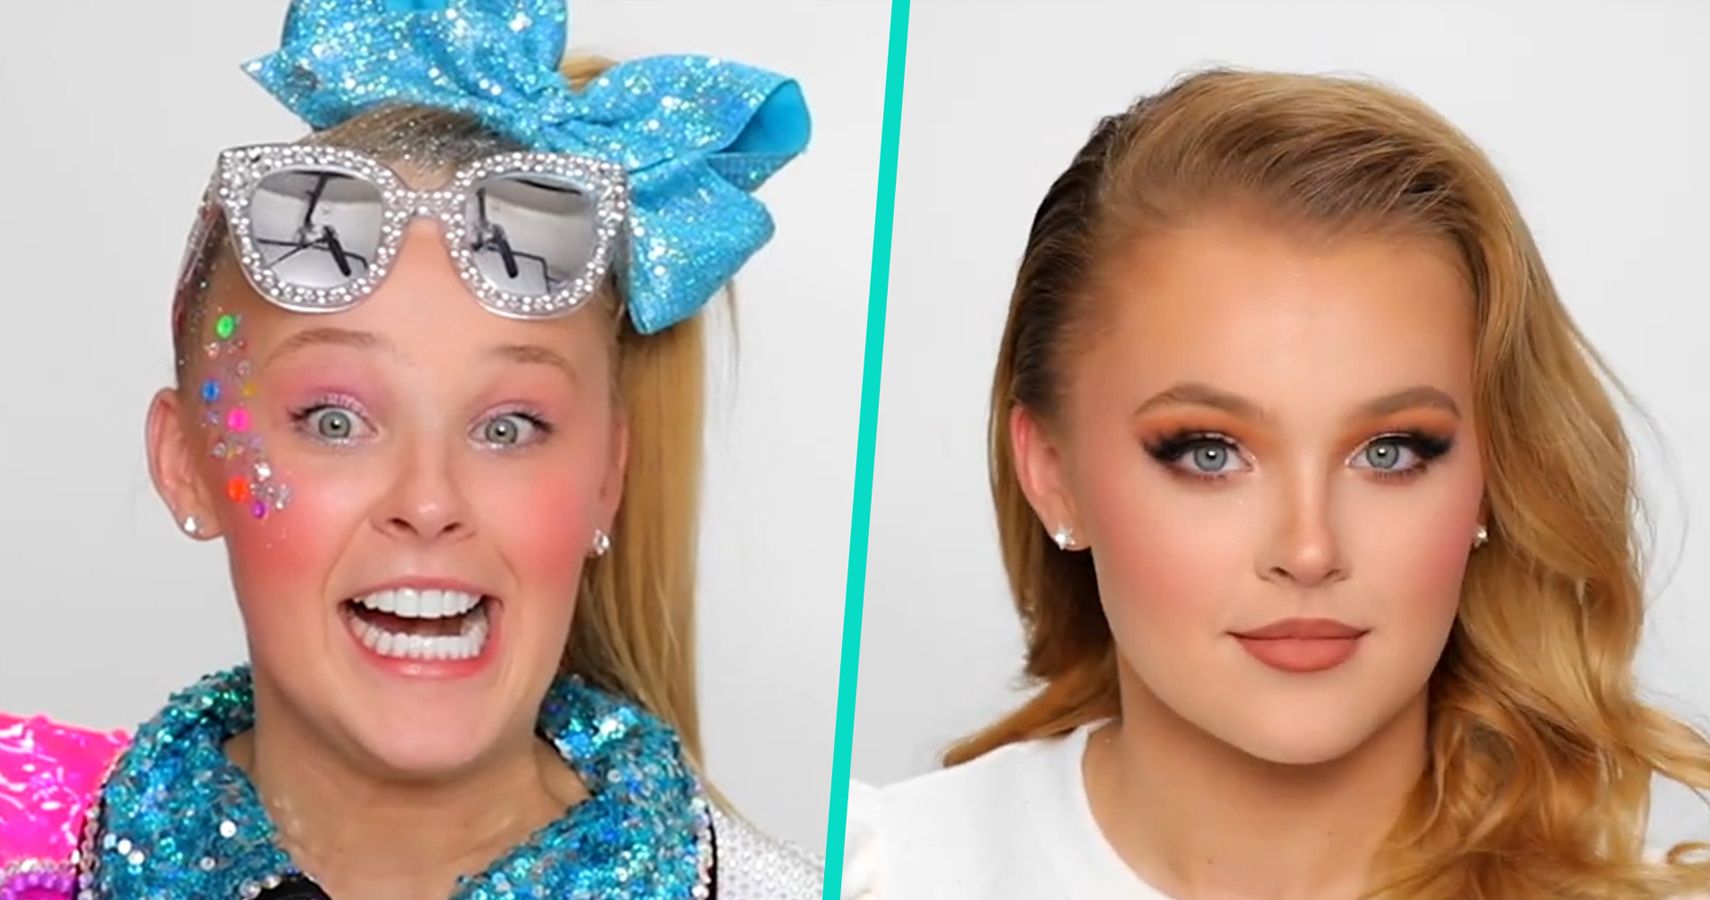 JoJo Siwa Confessed That She Was “Terrified” About Her James Charles Makeover